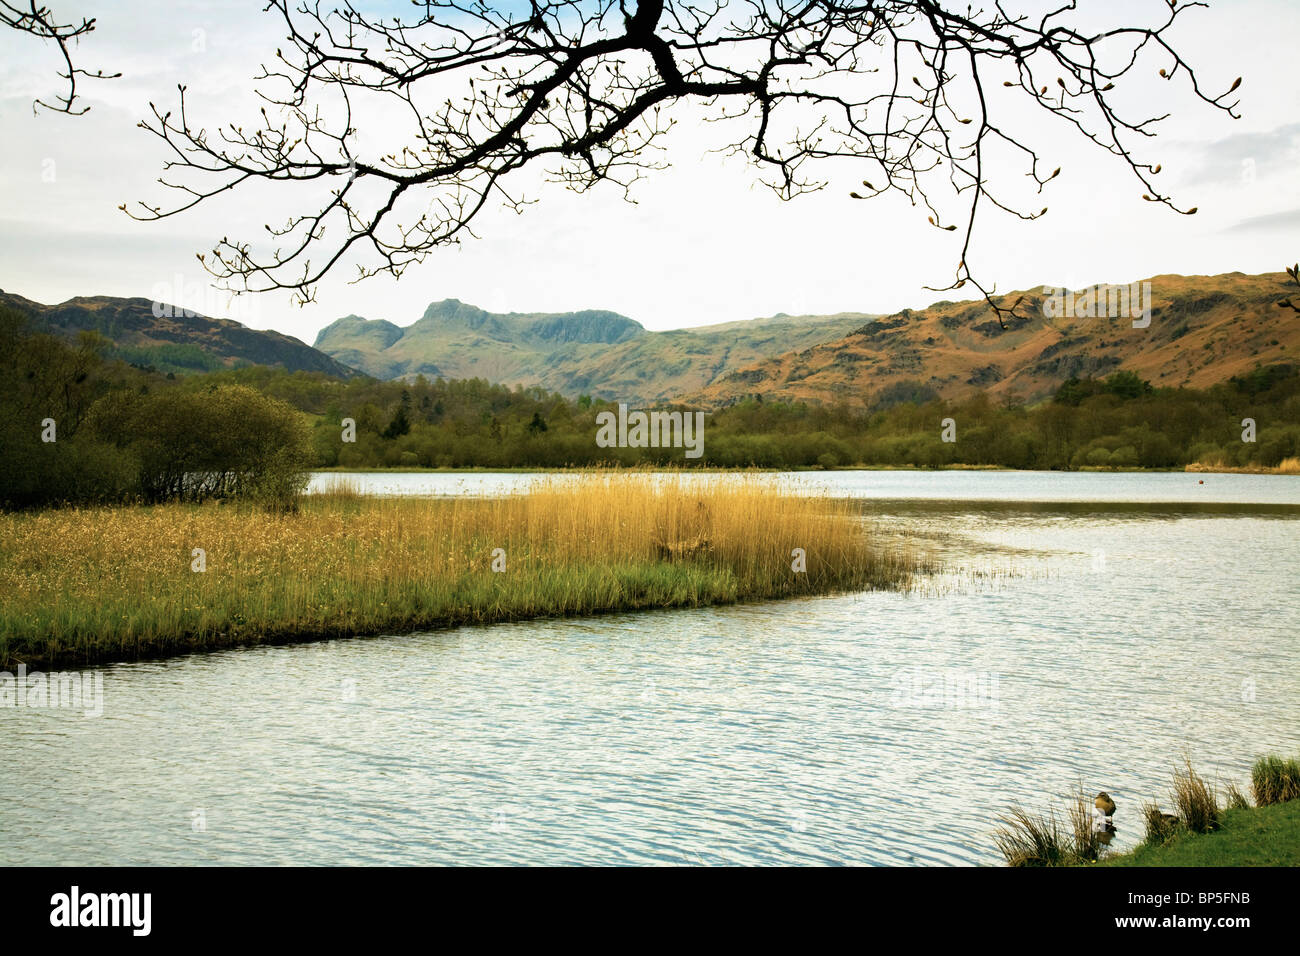 Elterwater, Cumbria, England; Reeds Along The Shoreline Surrounded By Mountains Stock Photo